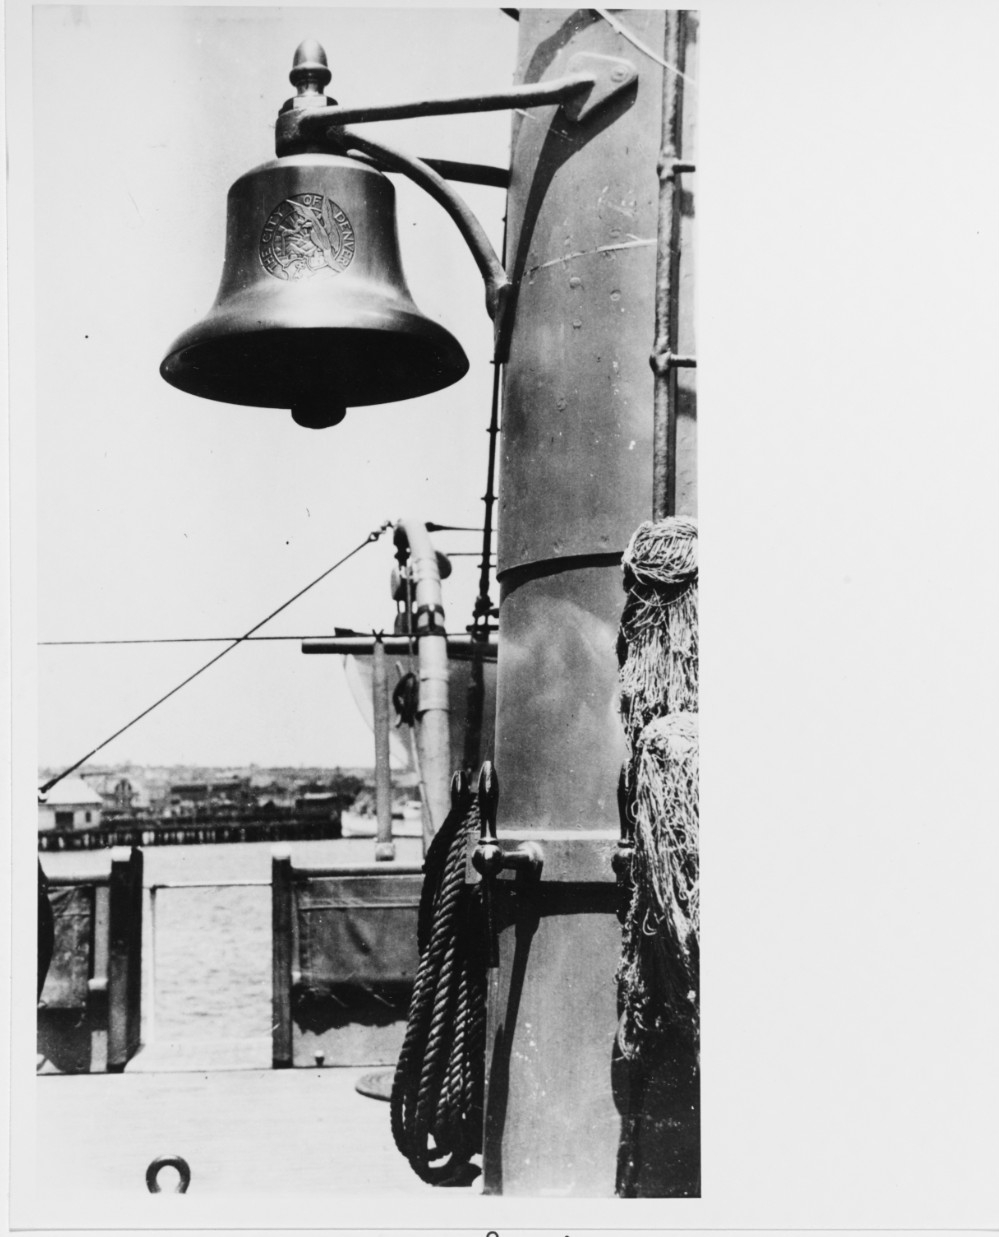 The Ship's Bell